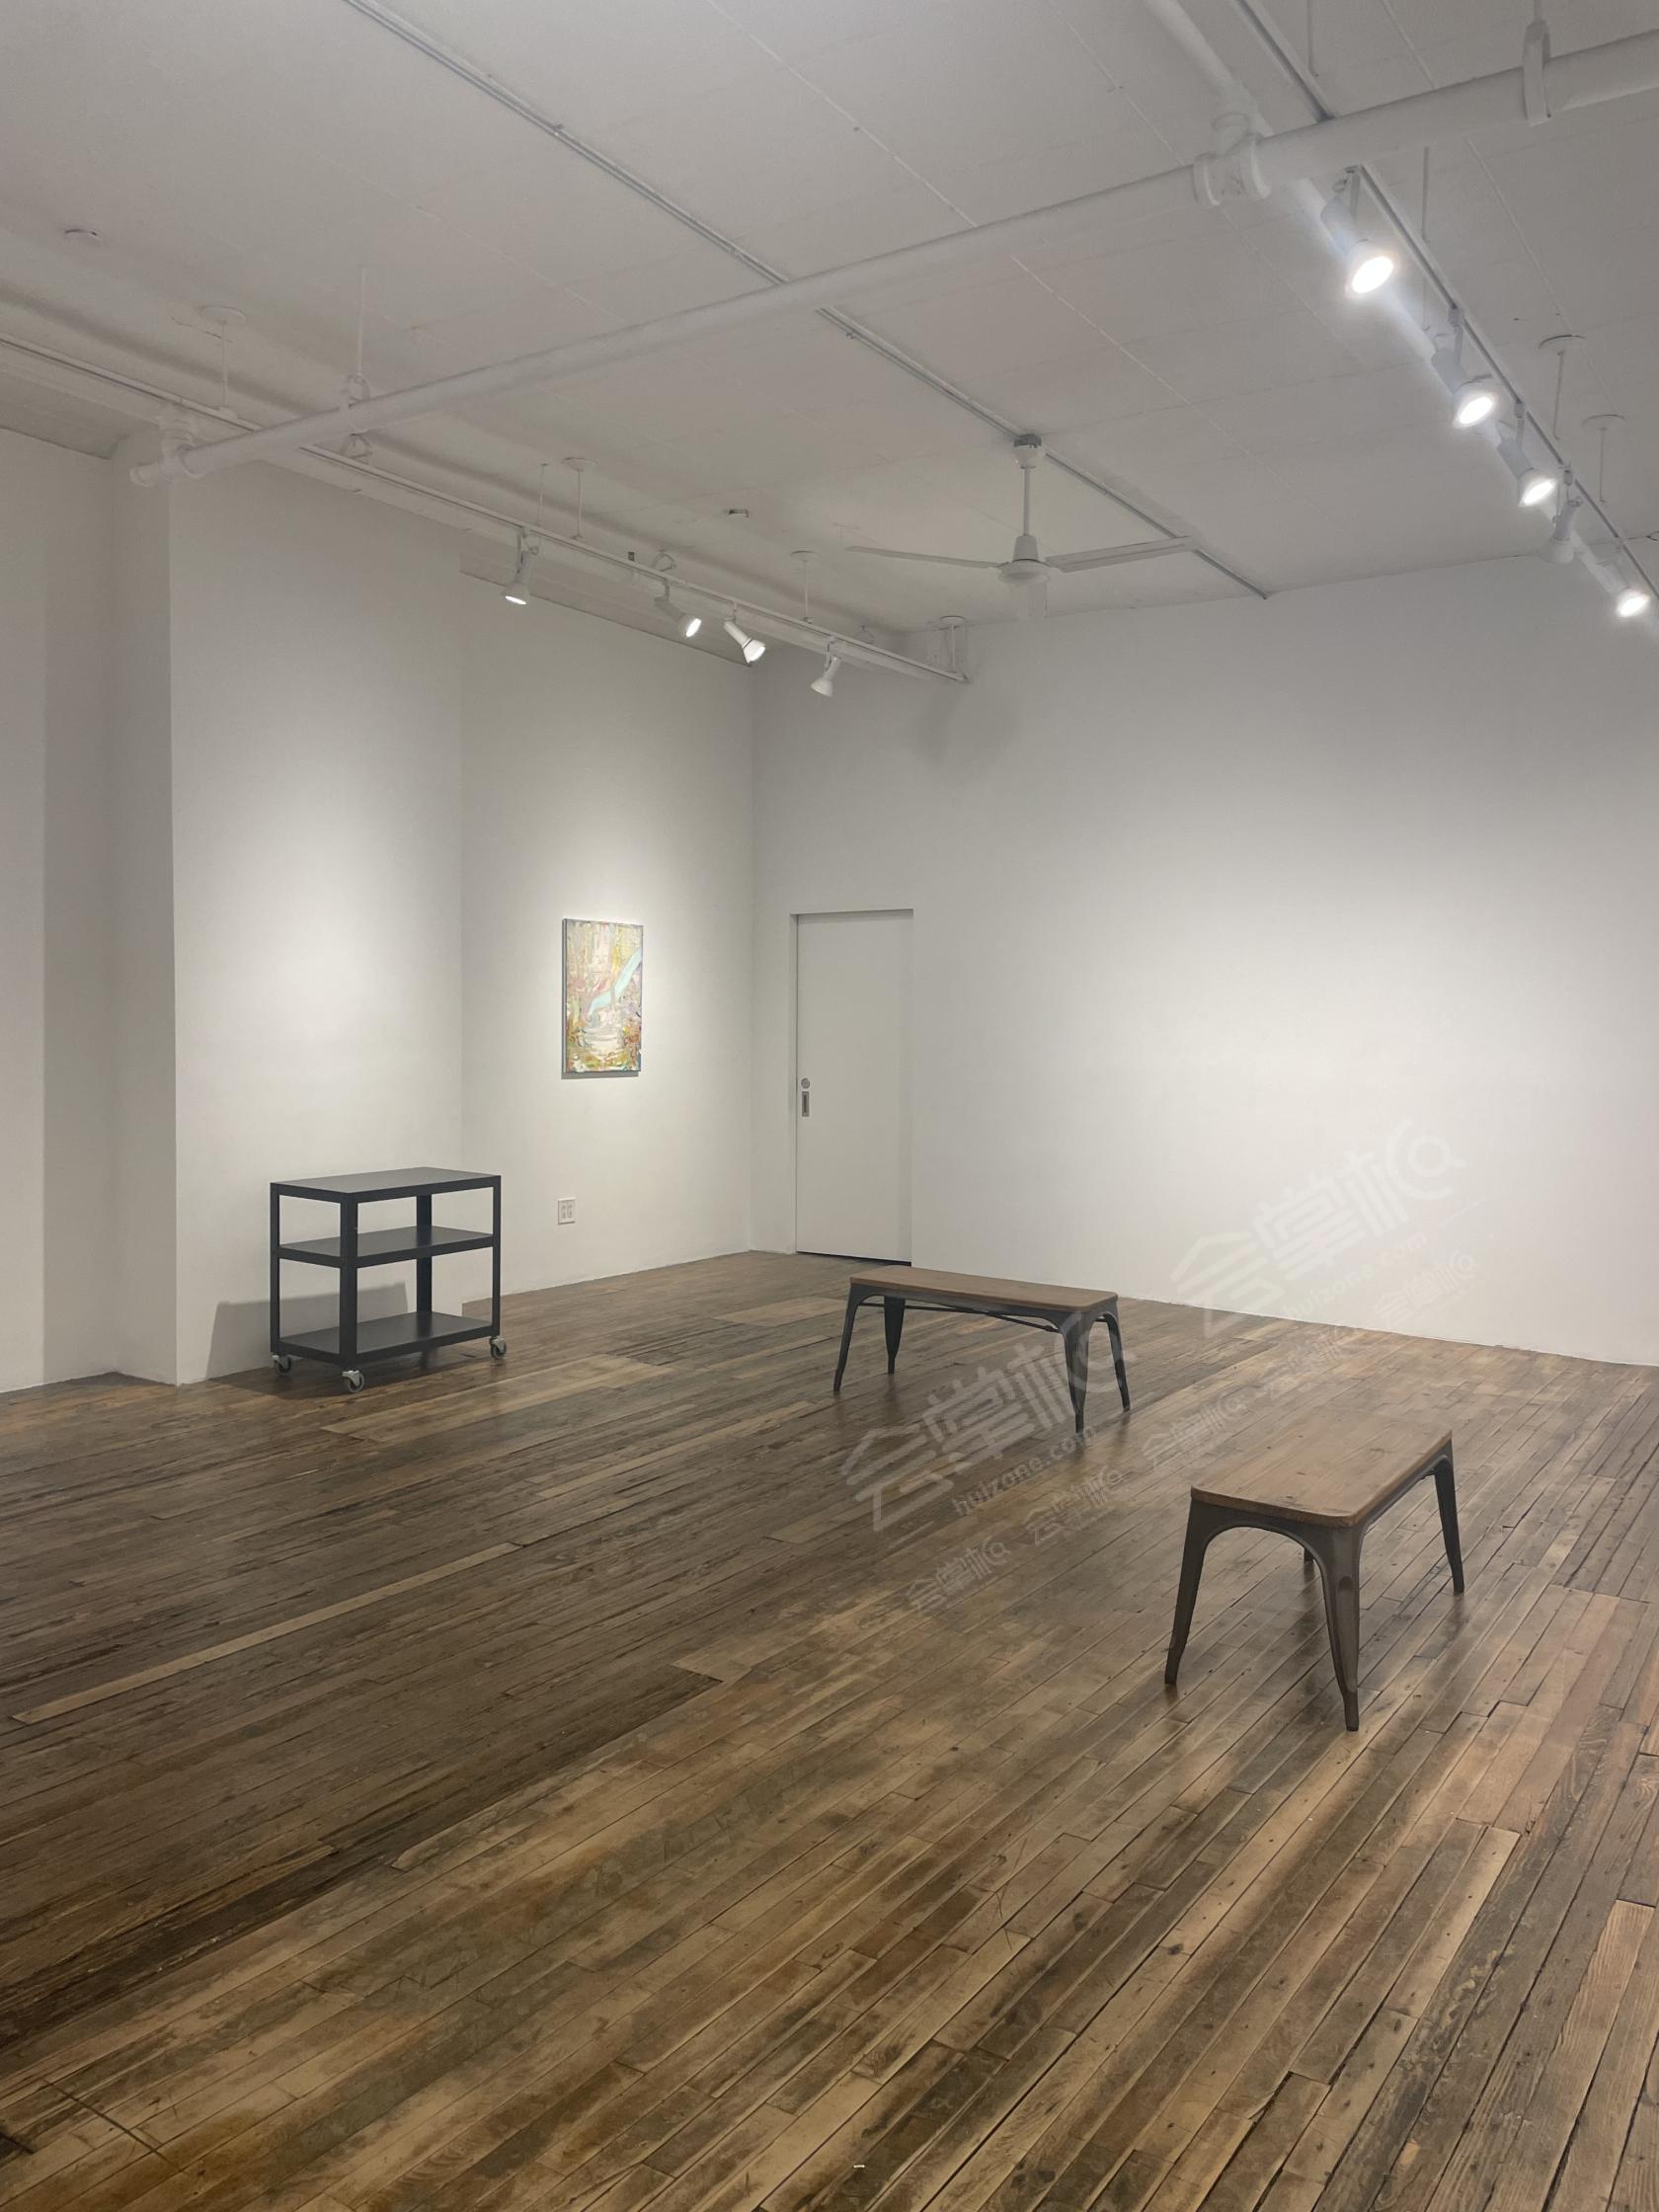 Gallery Space